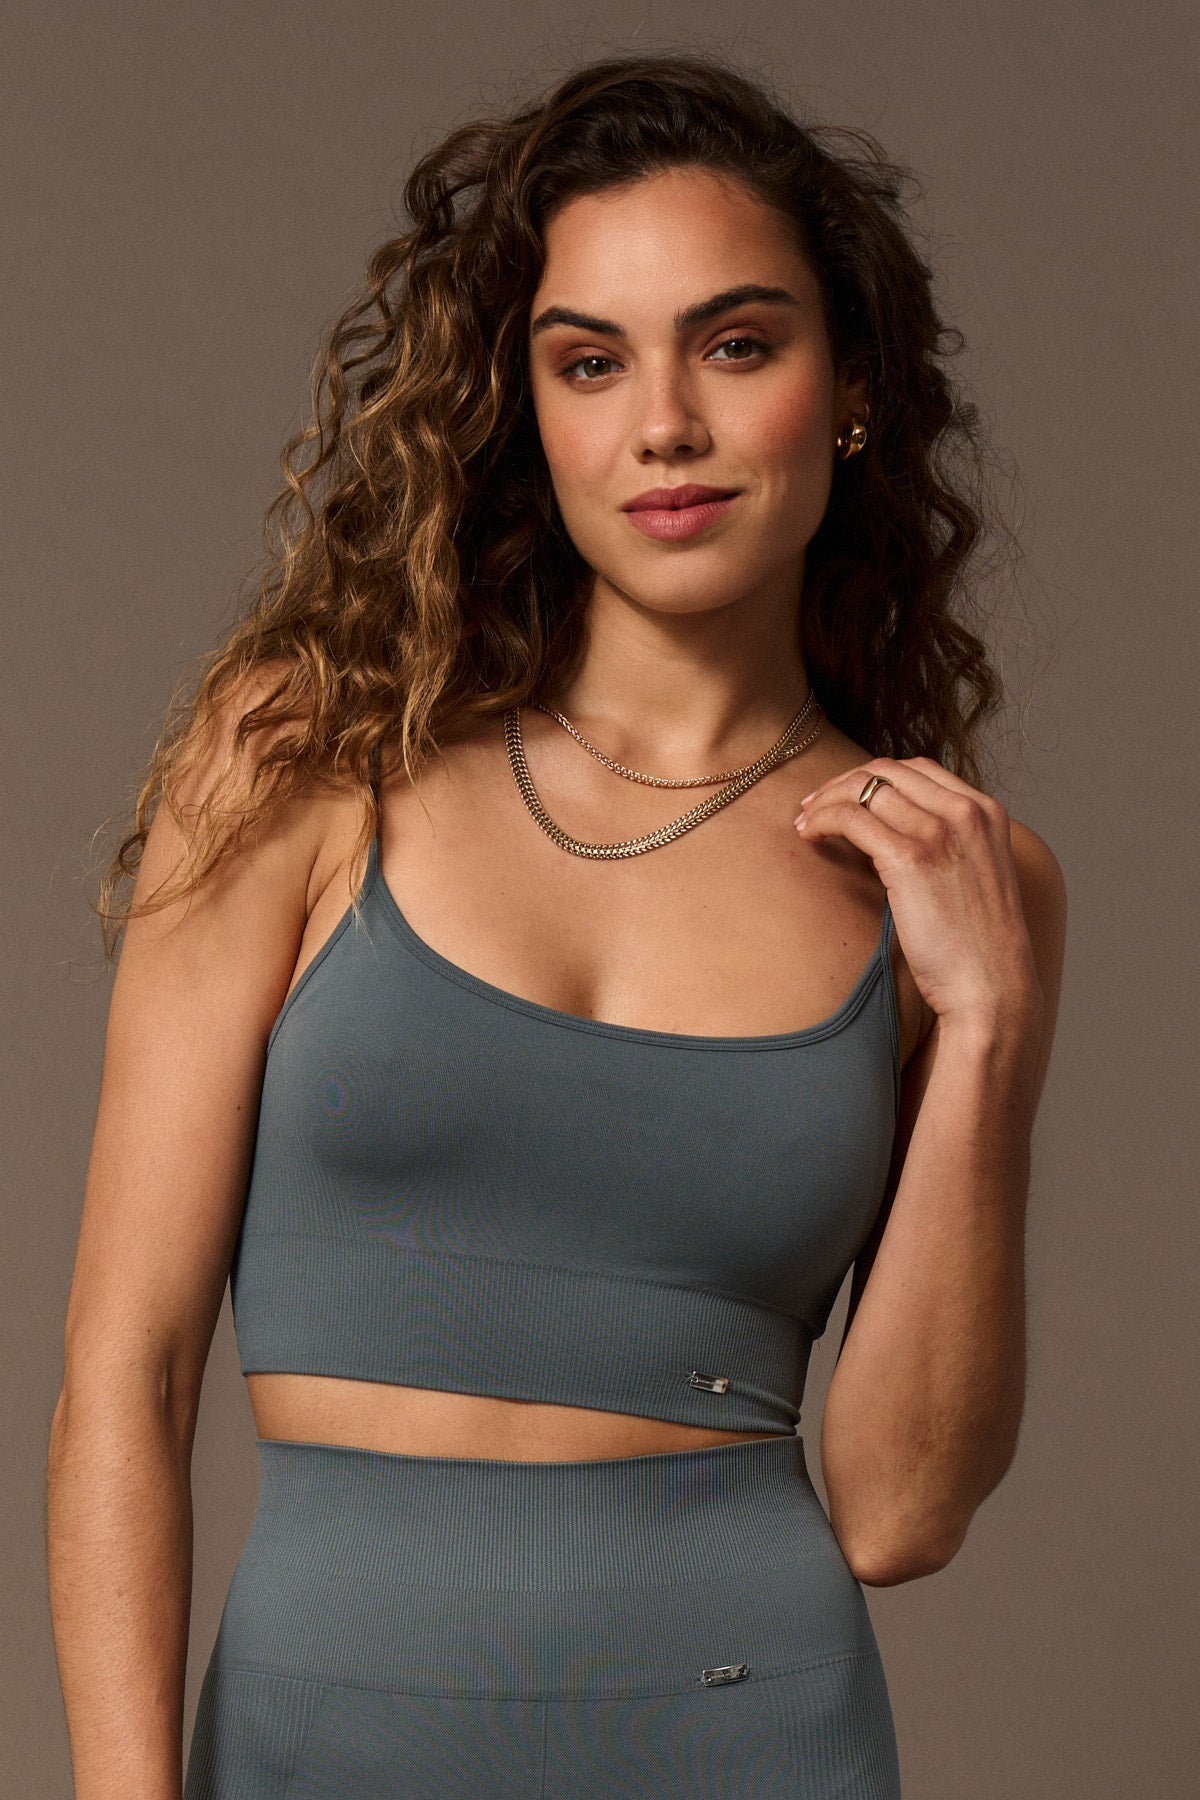 Joy Bra A. in Grey-Bras-Shop Clothing Sustainable Recycled Yoga Leggings Women's On-line Barcelona Believe Athletics Sustainable Recycled Yoga Clothes